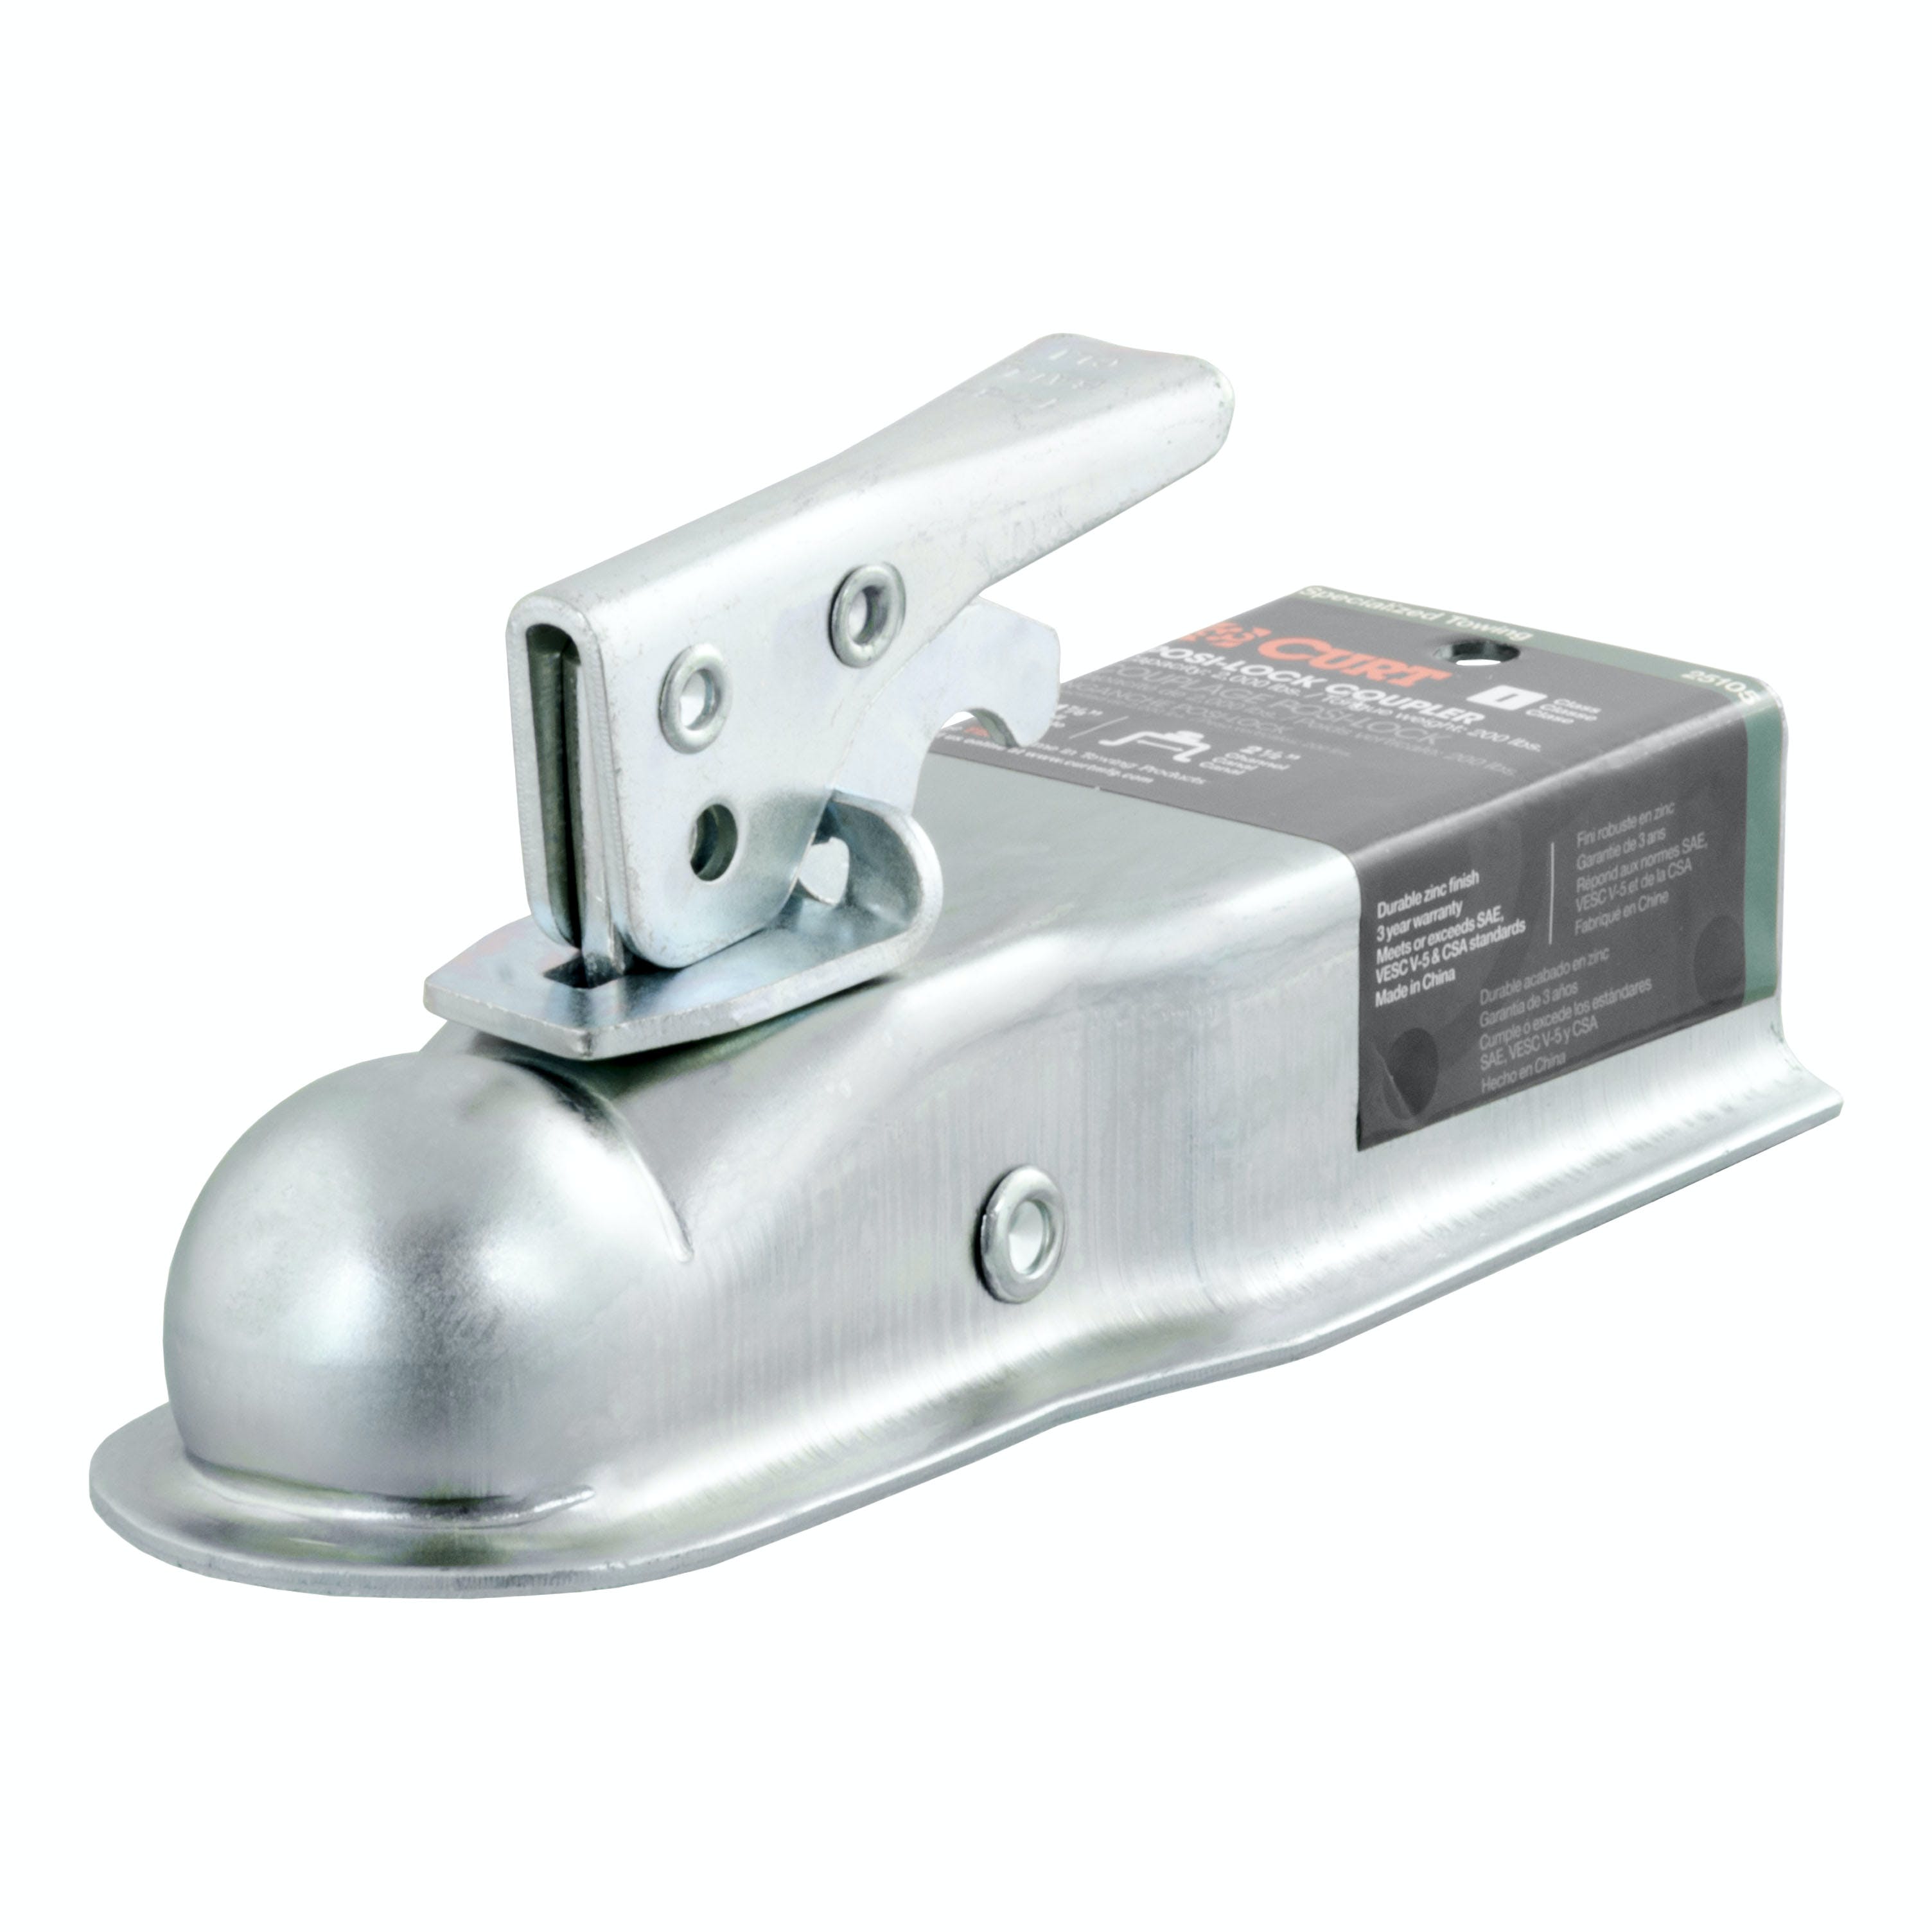 CURT 25105 1-7/8 Straight-Tongue Coupler with Posi-Lock (2-1/2 Channel, 2,000 lbs, Zinc)